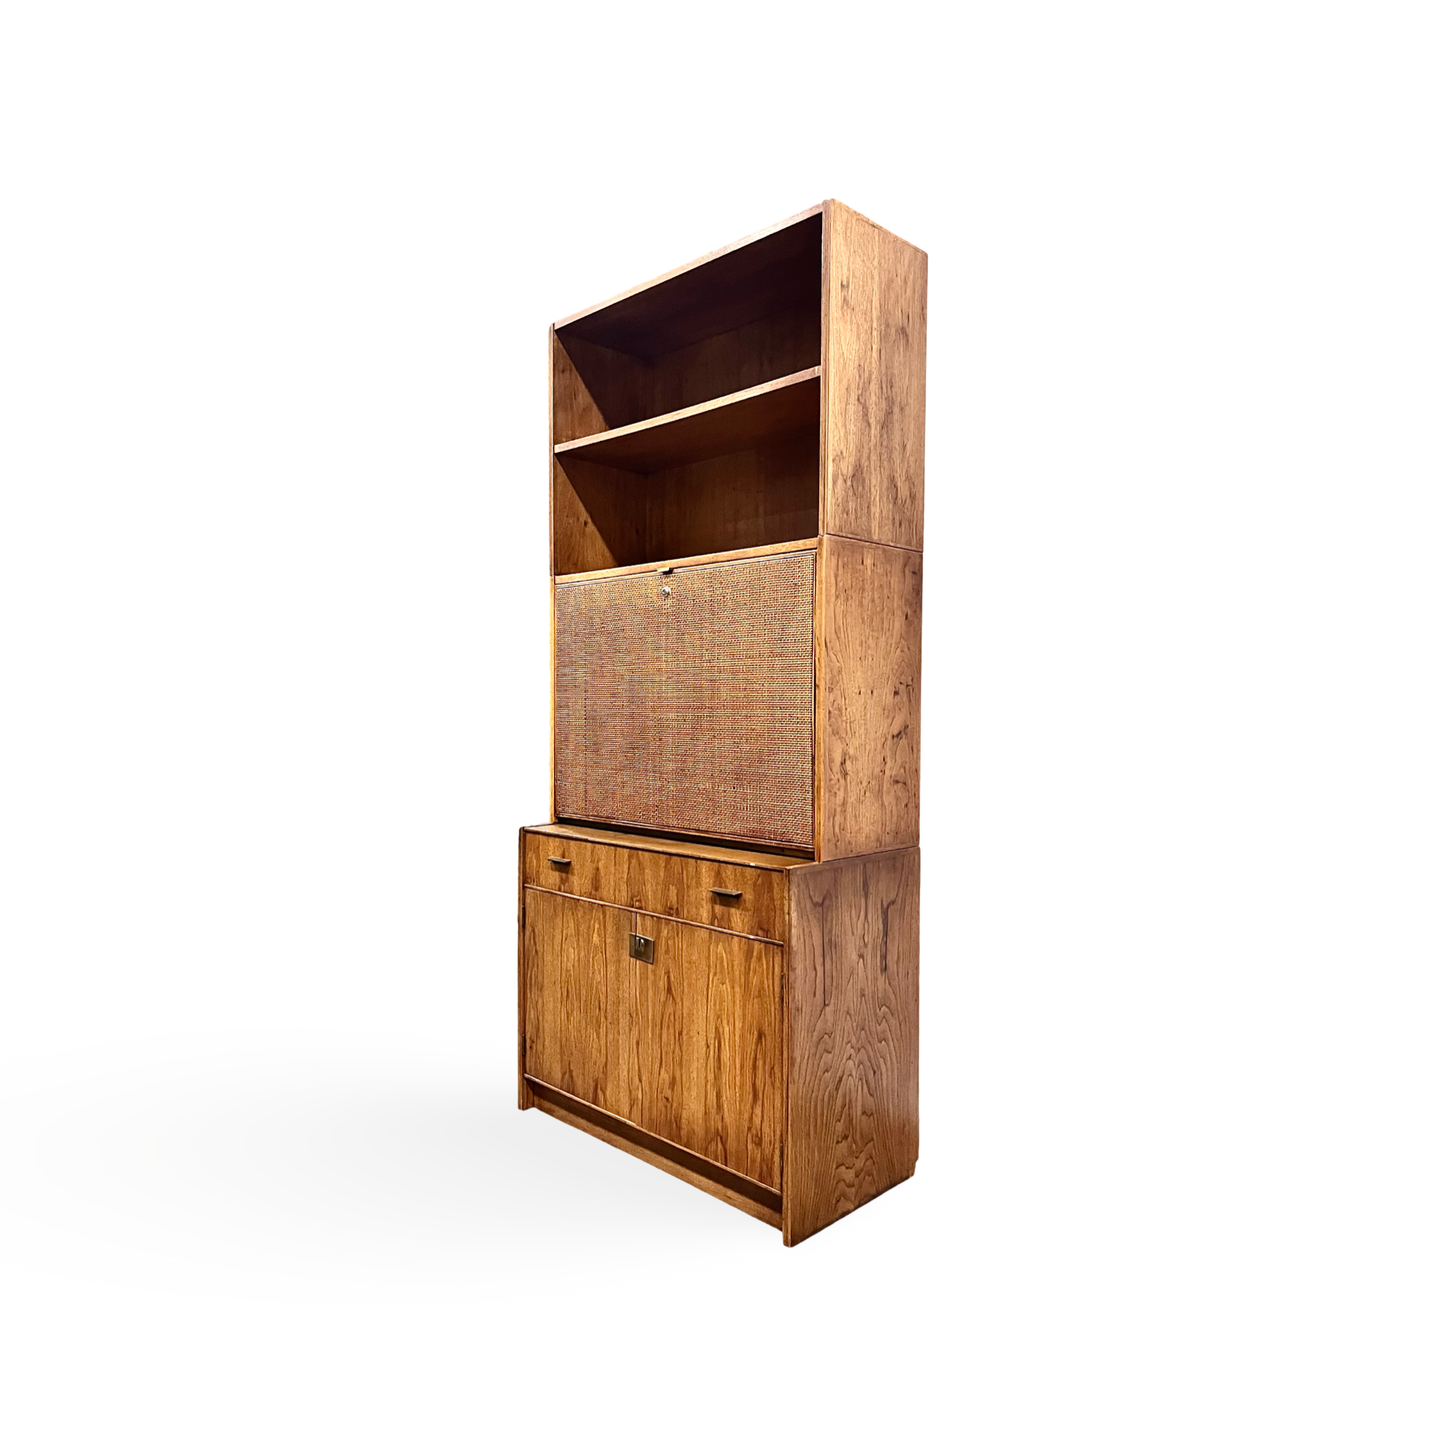 Jack Cartwright for Founders Patterns 15 Mid Century Modern Bookshelf Cabinet with Drop Down Desk c. 1960s